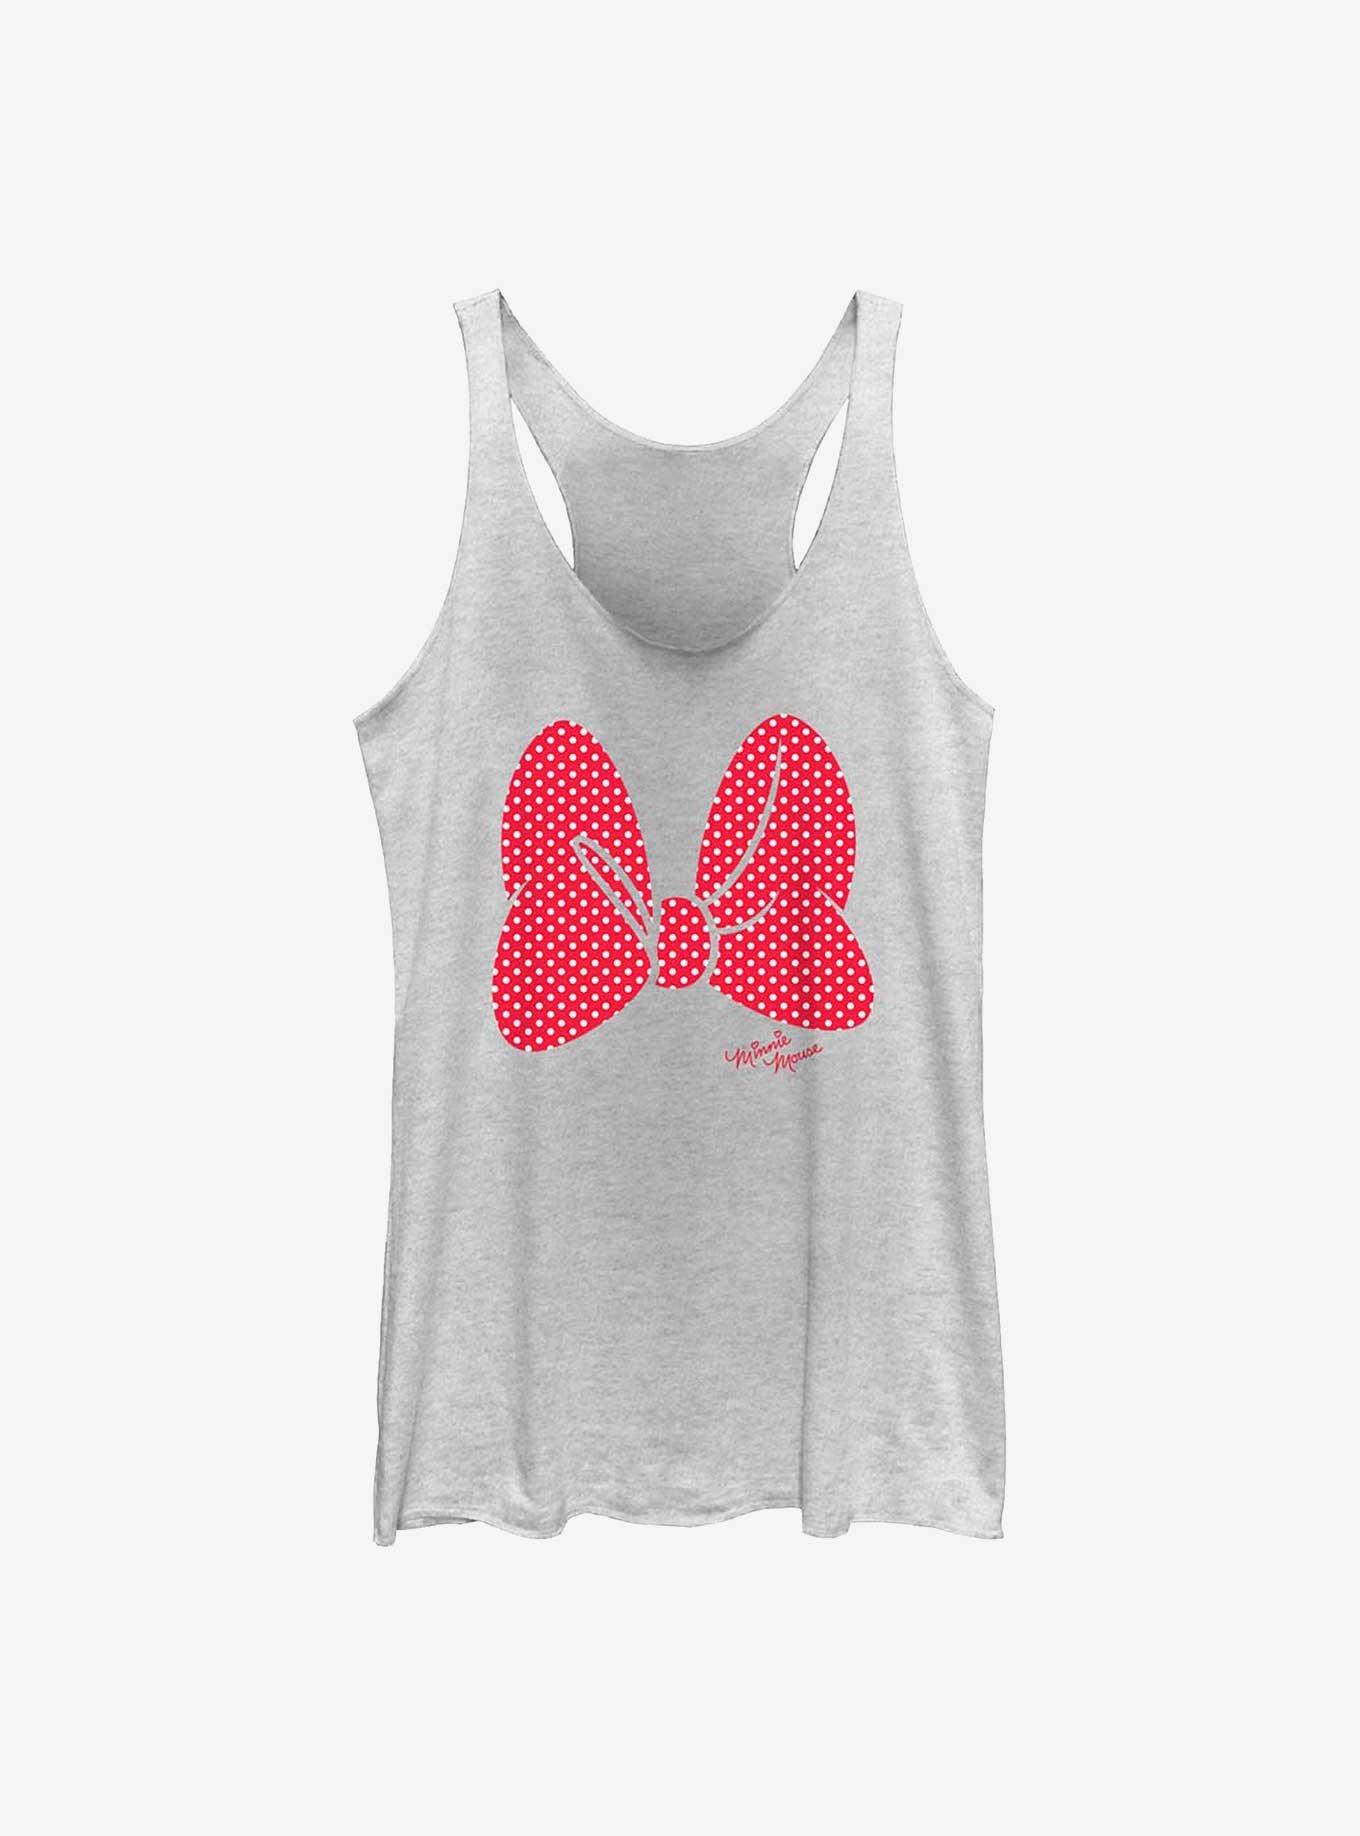 Minnie Mouse Tank Top Womens